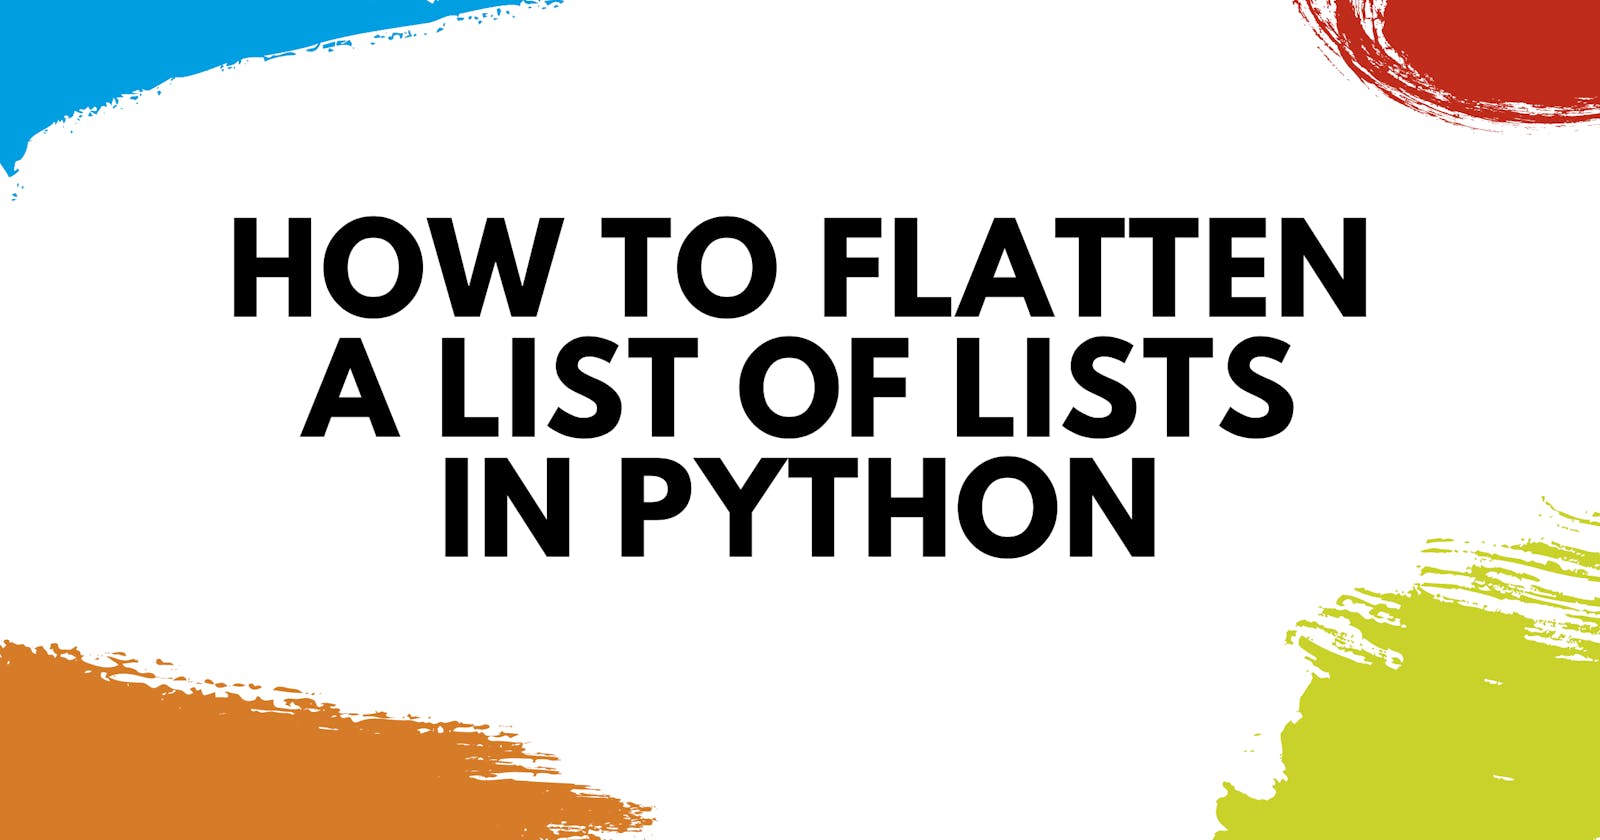 7 Different Ways to Flatten a List of Lists in Python